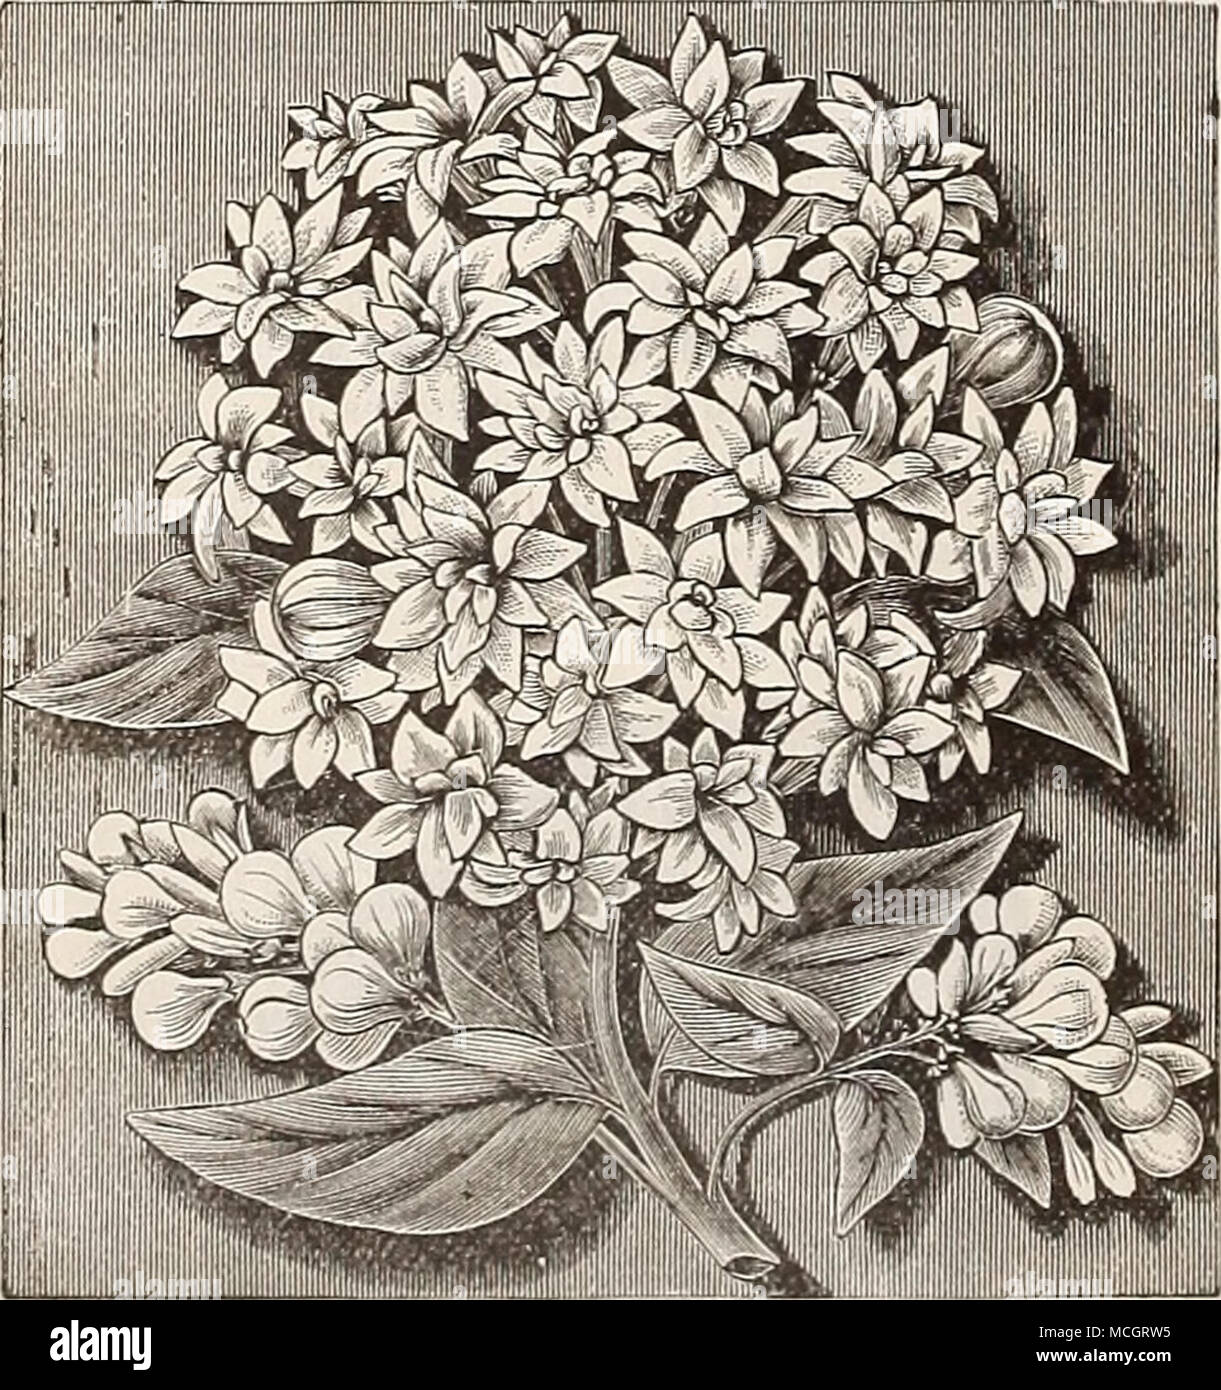 . Bouvardia, Alfred Nkunbr. BOUYARDIAS. Shrubby plants, with corymbs of white, rose, crimson and scarlet flowers, blooming during the autumn and winter. Alfred Neuner. Purest waxy-white. (See cut.) Davidsoni. The be--t of the single white varieties. Hlllllboldti Corymbiflora. Pure white, fragrant. President Cleveland. Dazzling scarlet flowers. Rosea Multiflora. Beautiful shade of salmon rose. 15 cts. each, set of 5 for 60 cts. Stock Photo